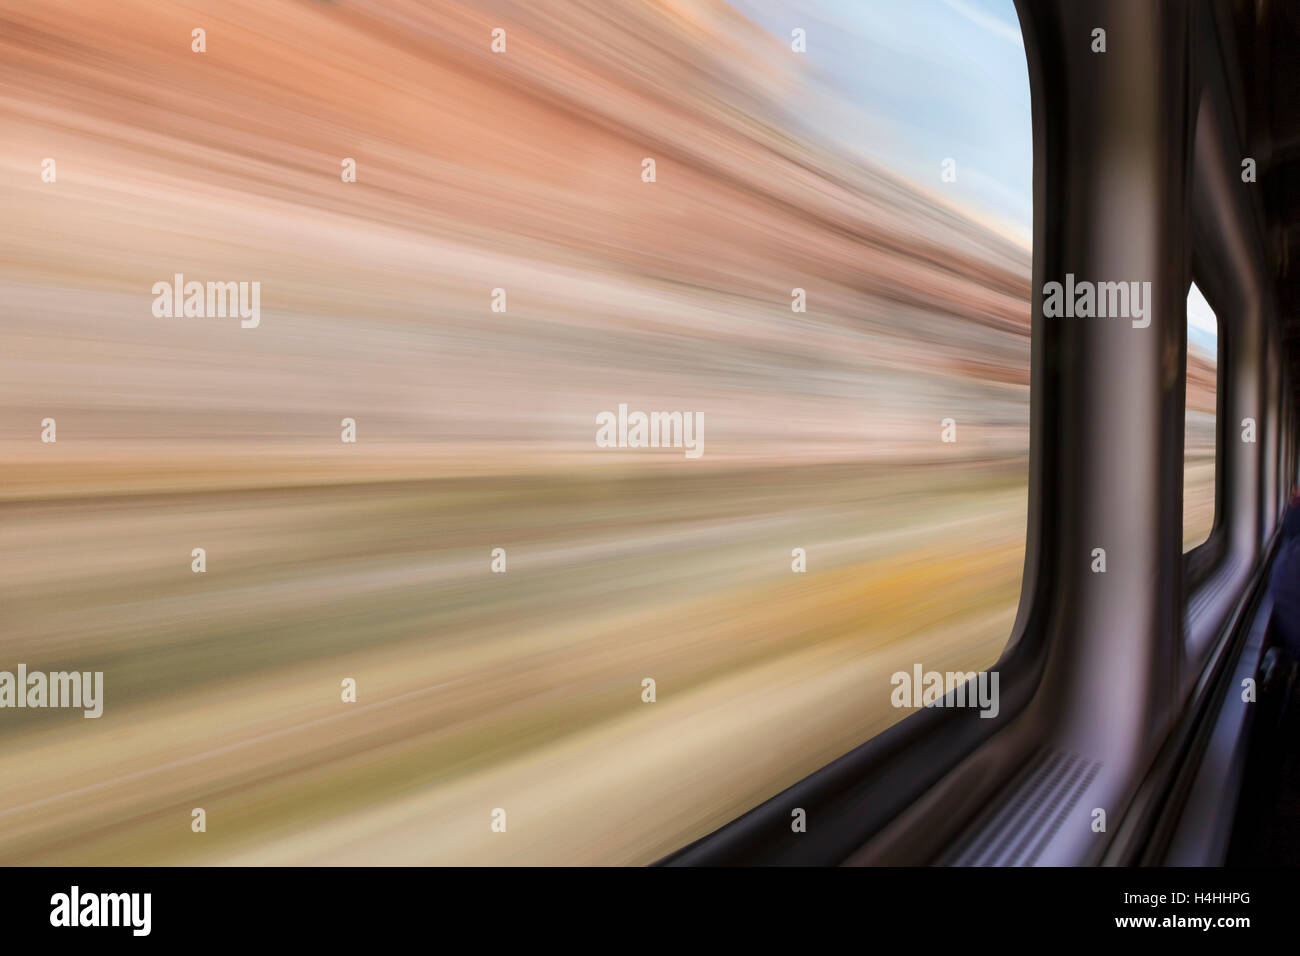 blurred abstract of canyon landscape seen from a  train window in motion - travel concept Stock Photo